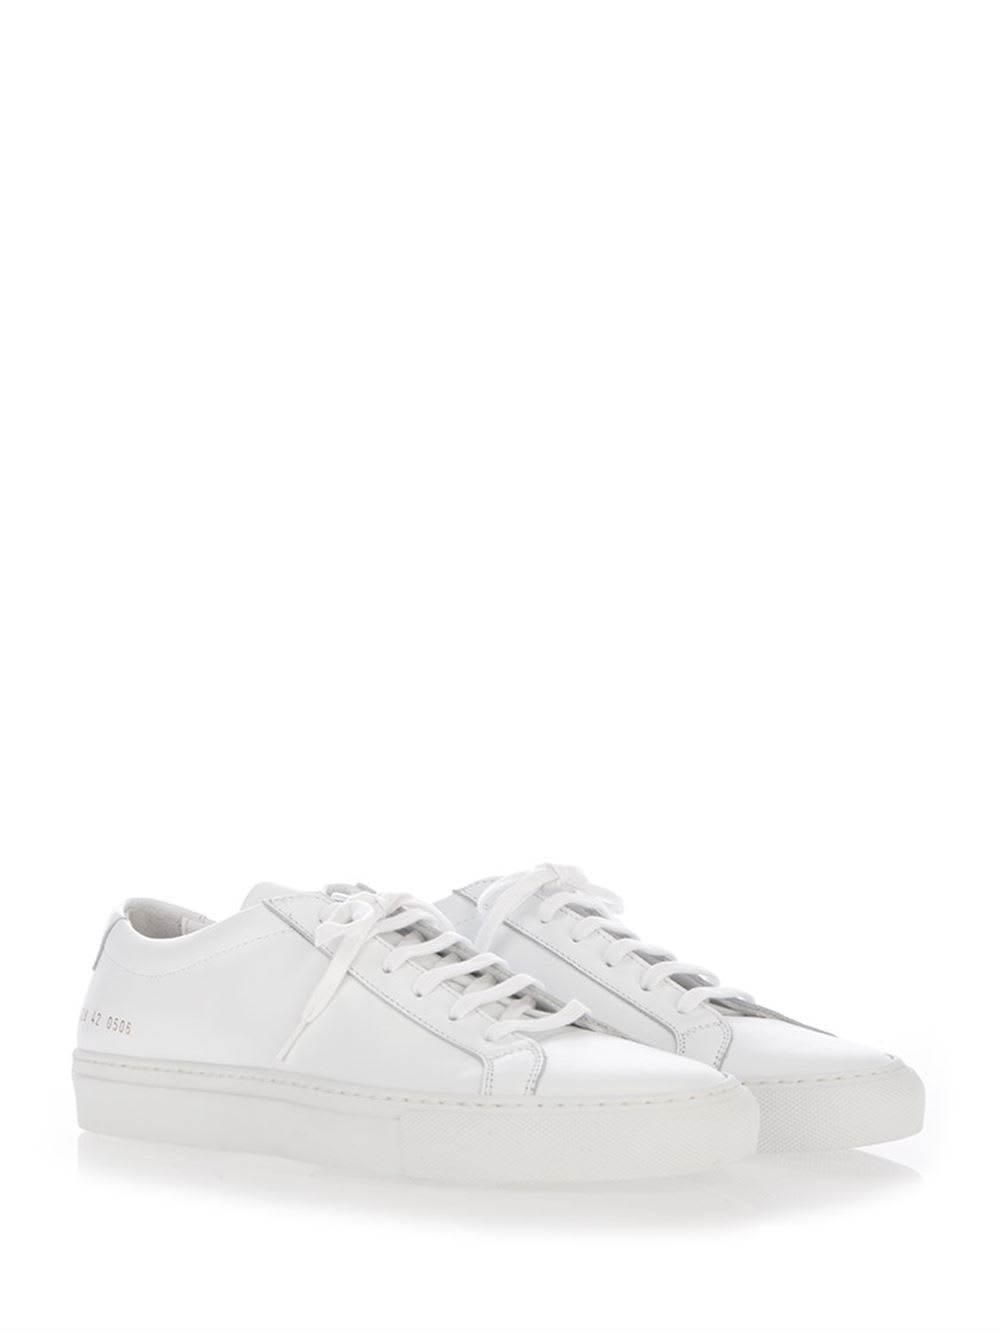 Shop Common Projects Total White Achilles Sneakers